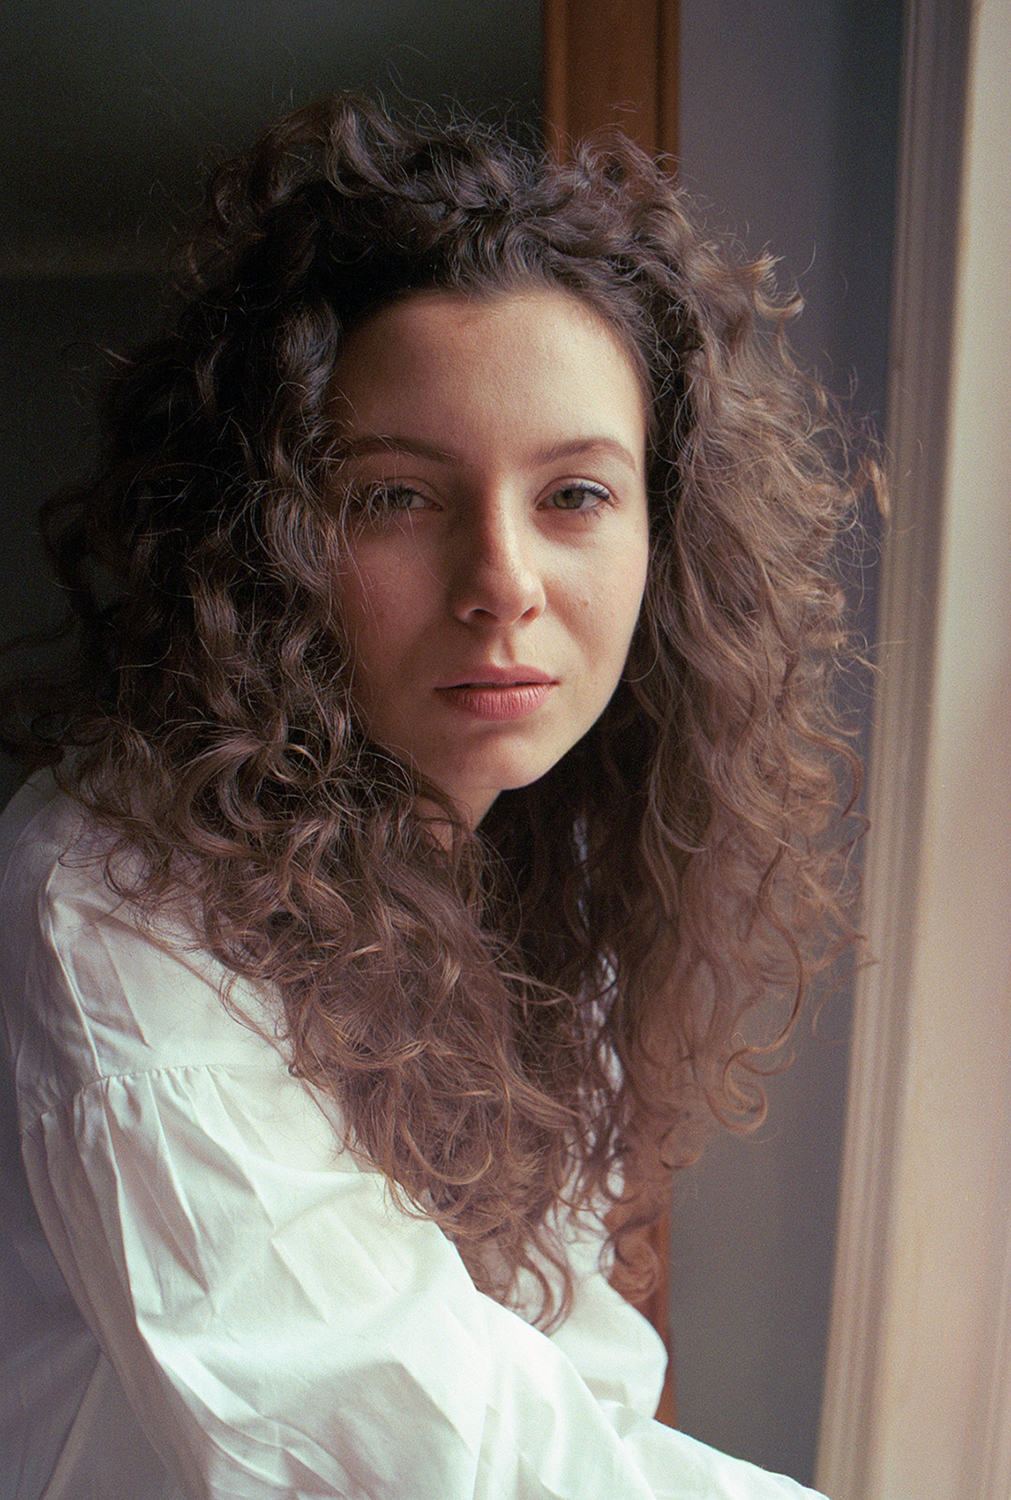 Woman standing by her window, staring into the camera, she is wearing a white shirt and has big curly hair.